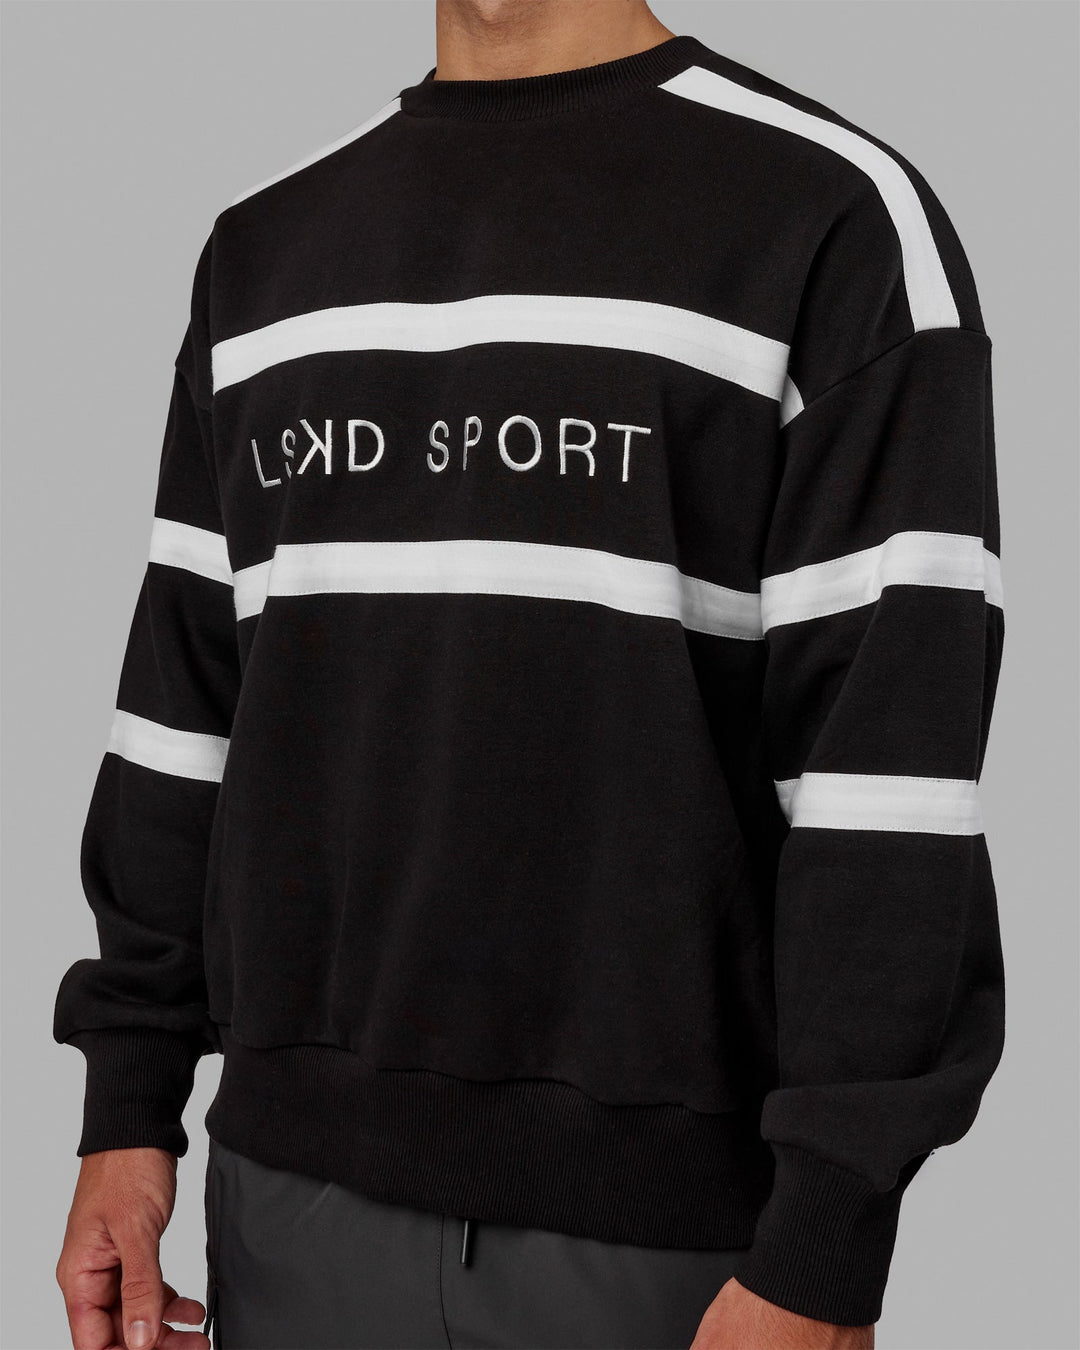 Man wearing Unisex Collateral Sweater Oversize - Black-White